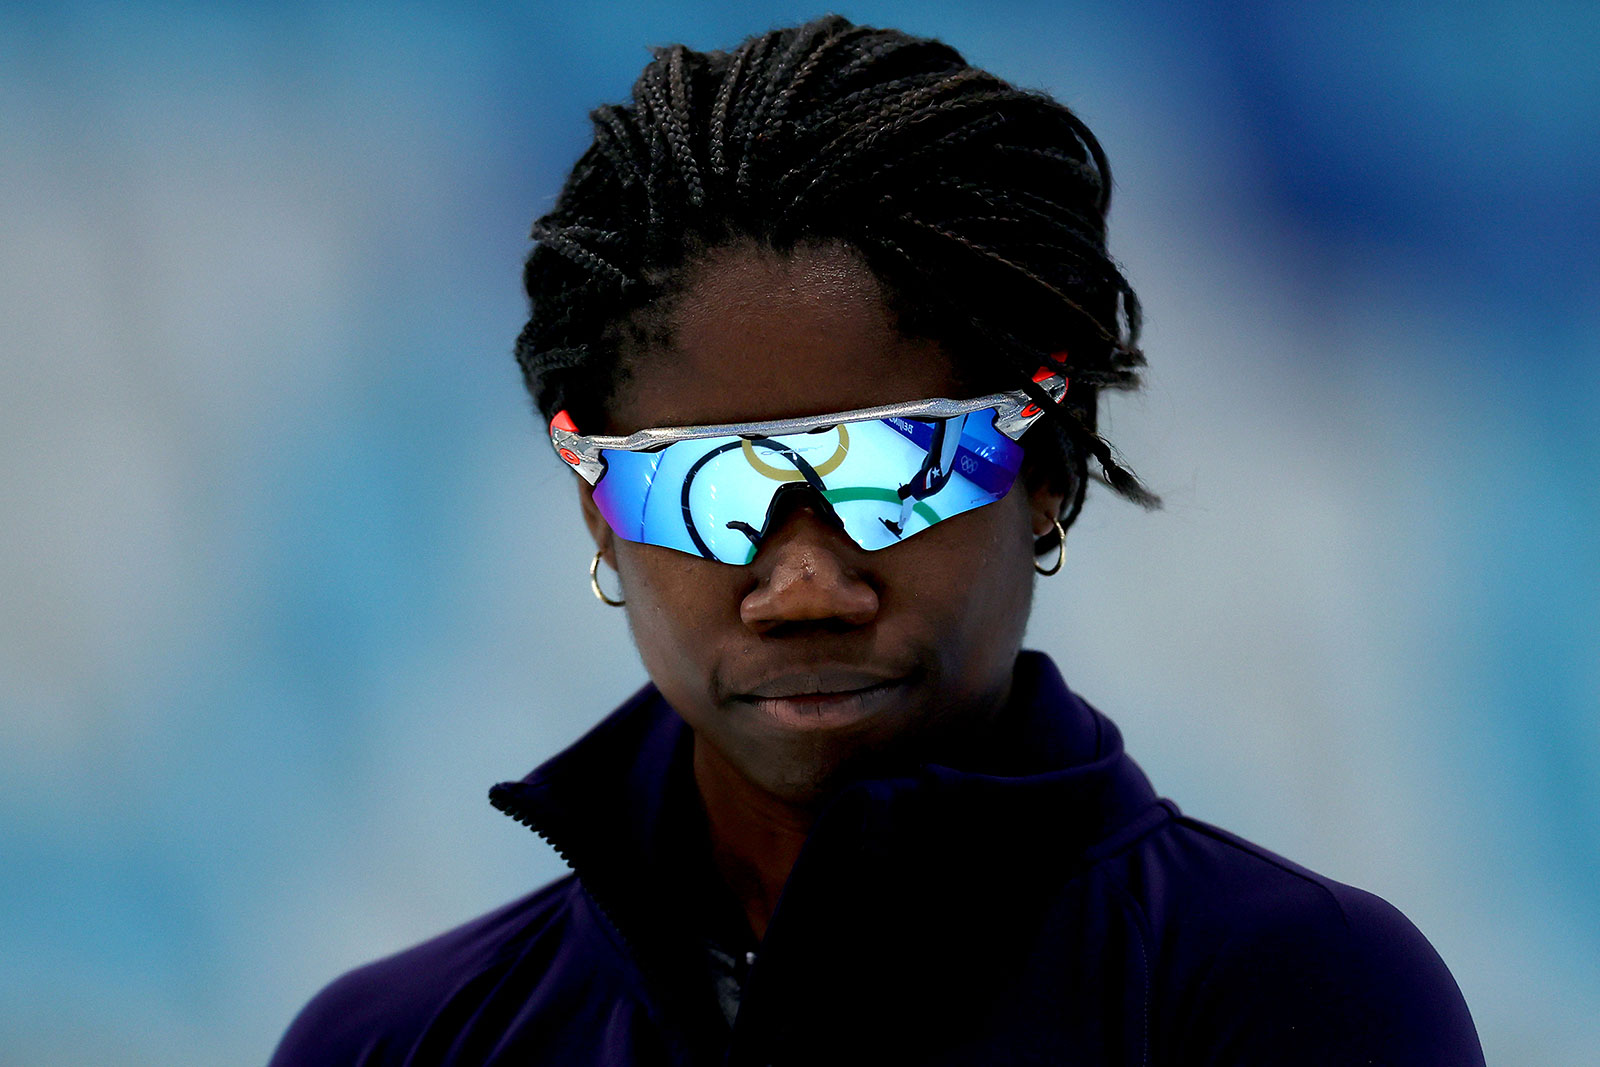 US speed skater Erin Jackson looks on during a practice session on February 1.